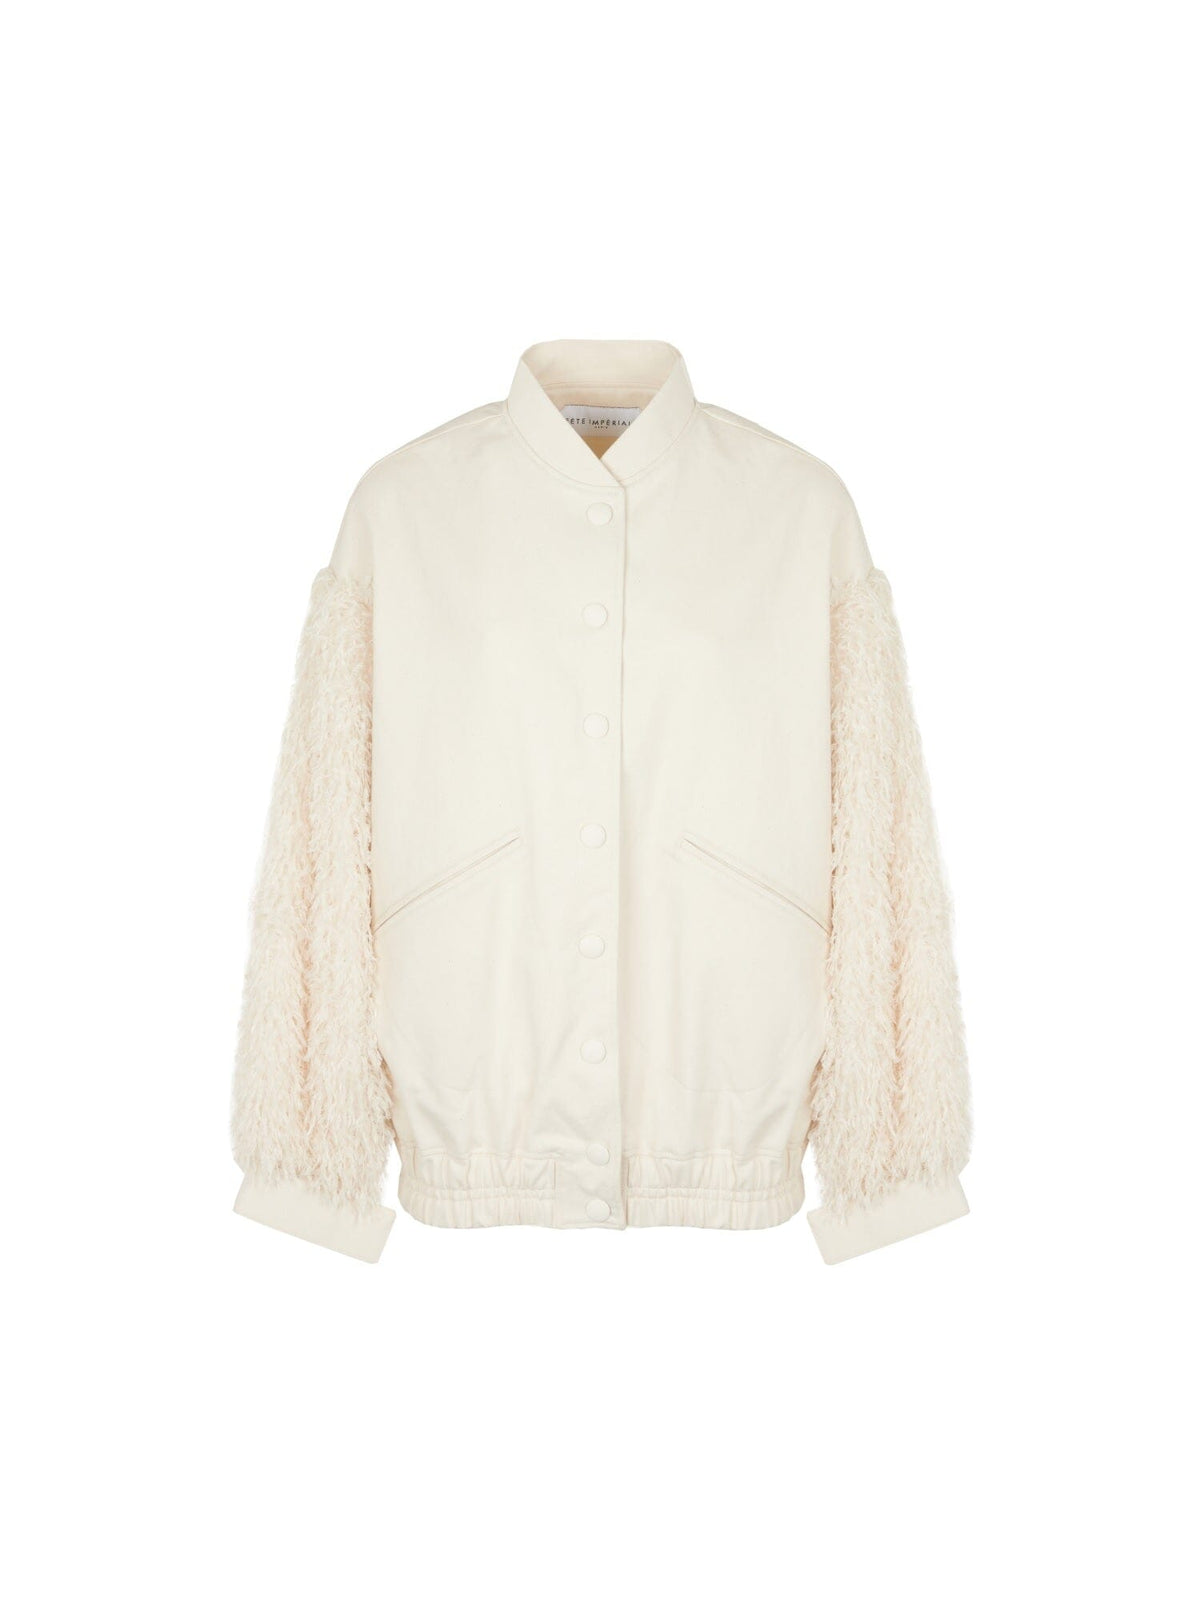 HENRI - Oversized bomber with elasticated bottom in denim and feathers Ecru Blouson Fête Impériale